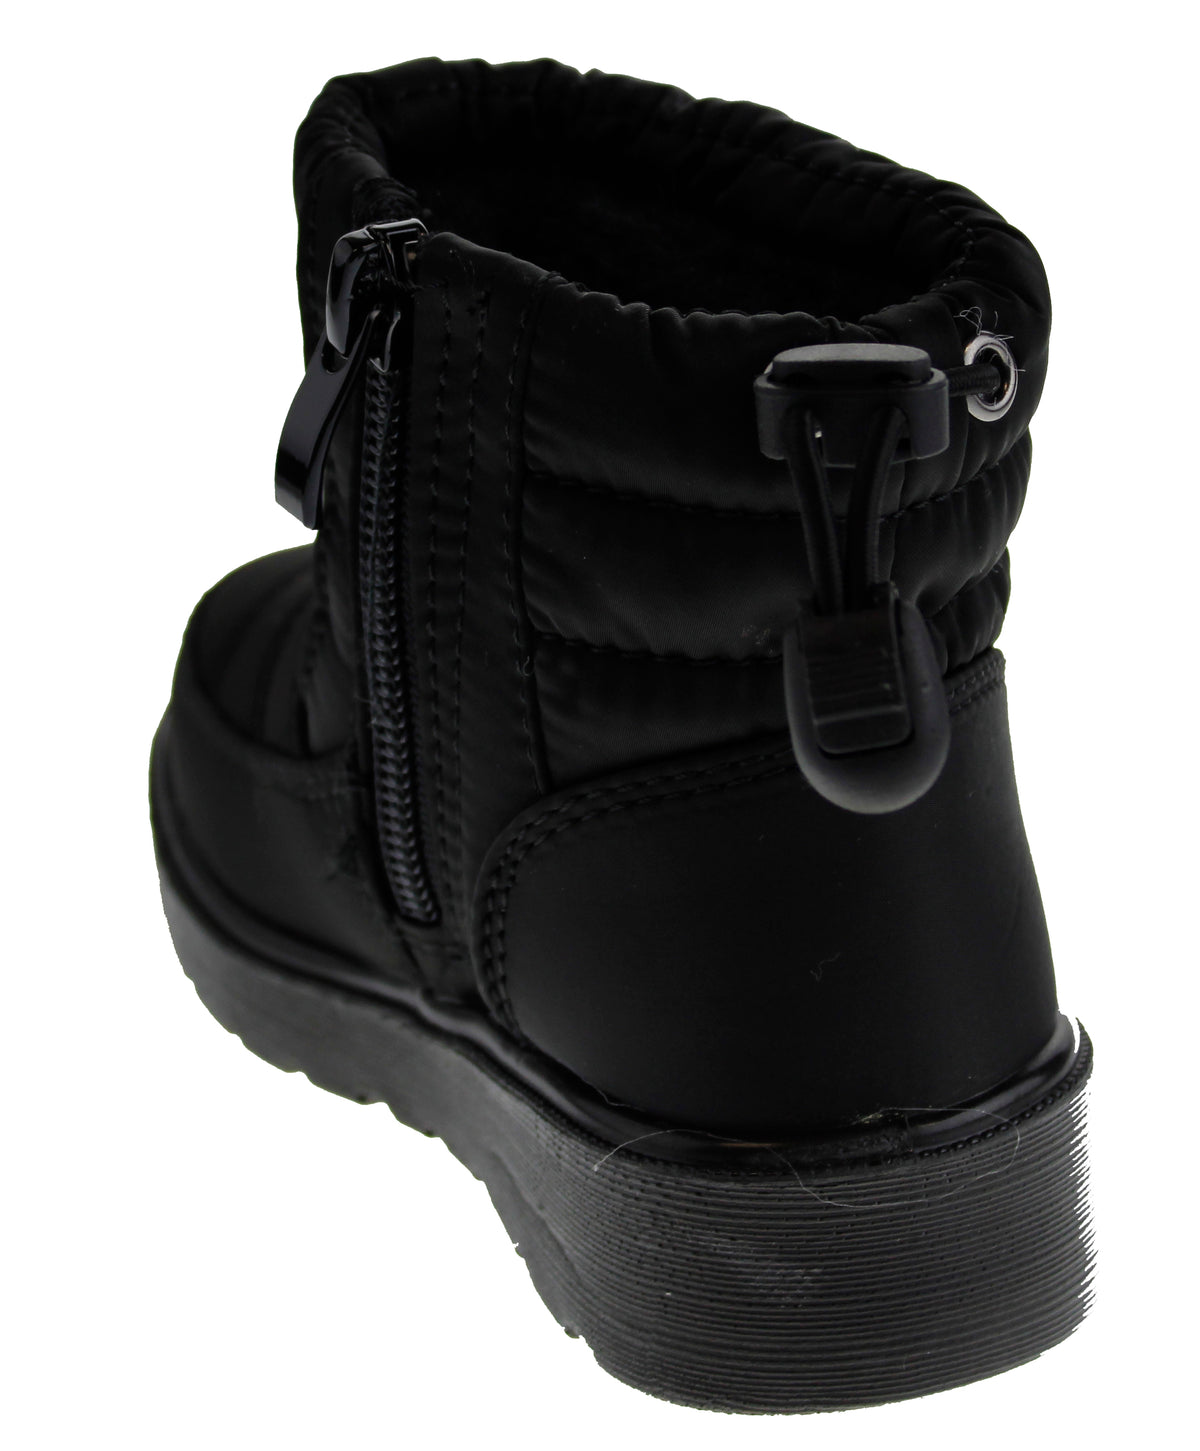 Coleen 1A Baby Girls Insulated Fur Lined Rain/Snow Boot